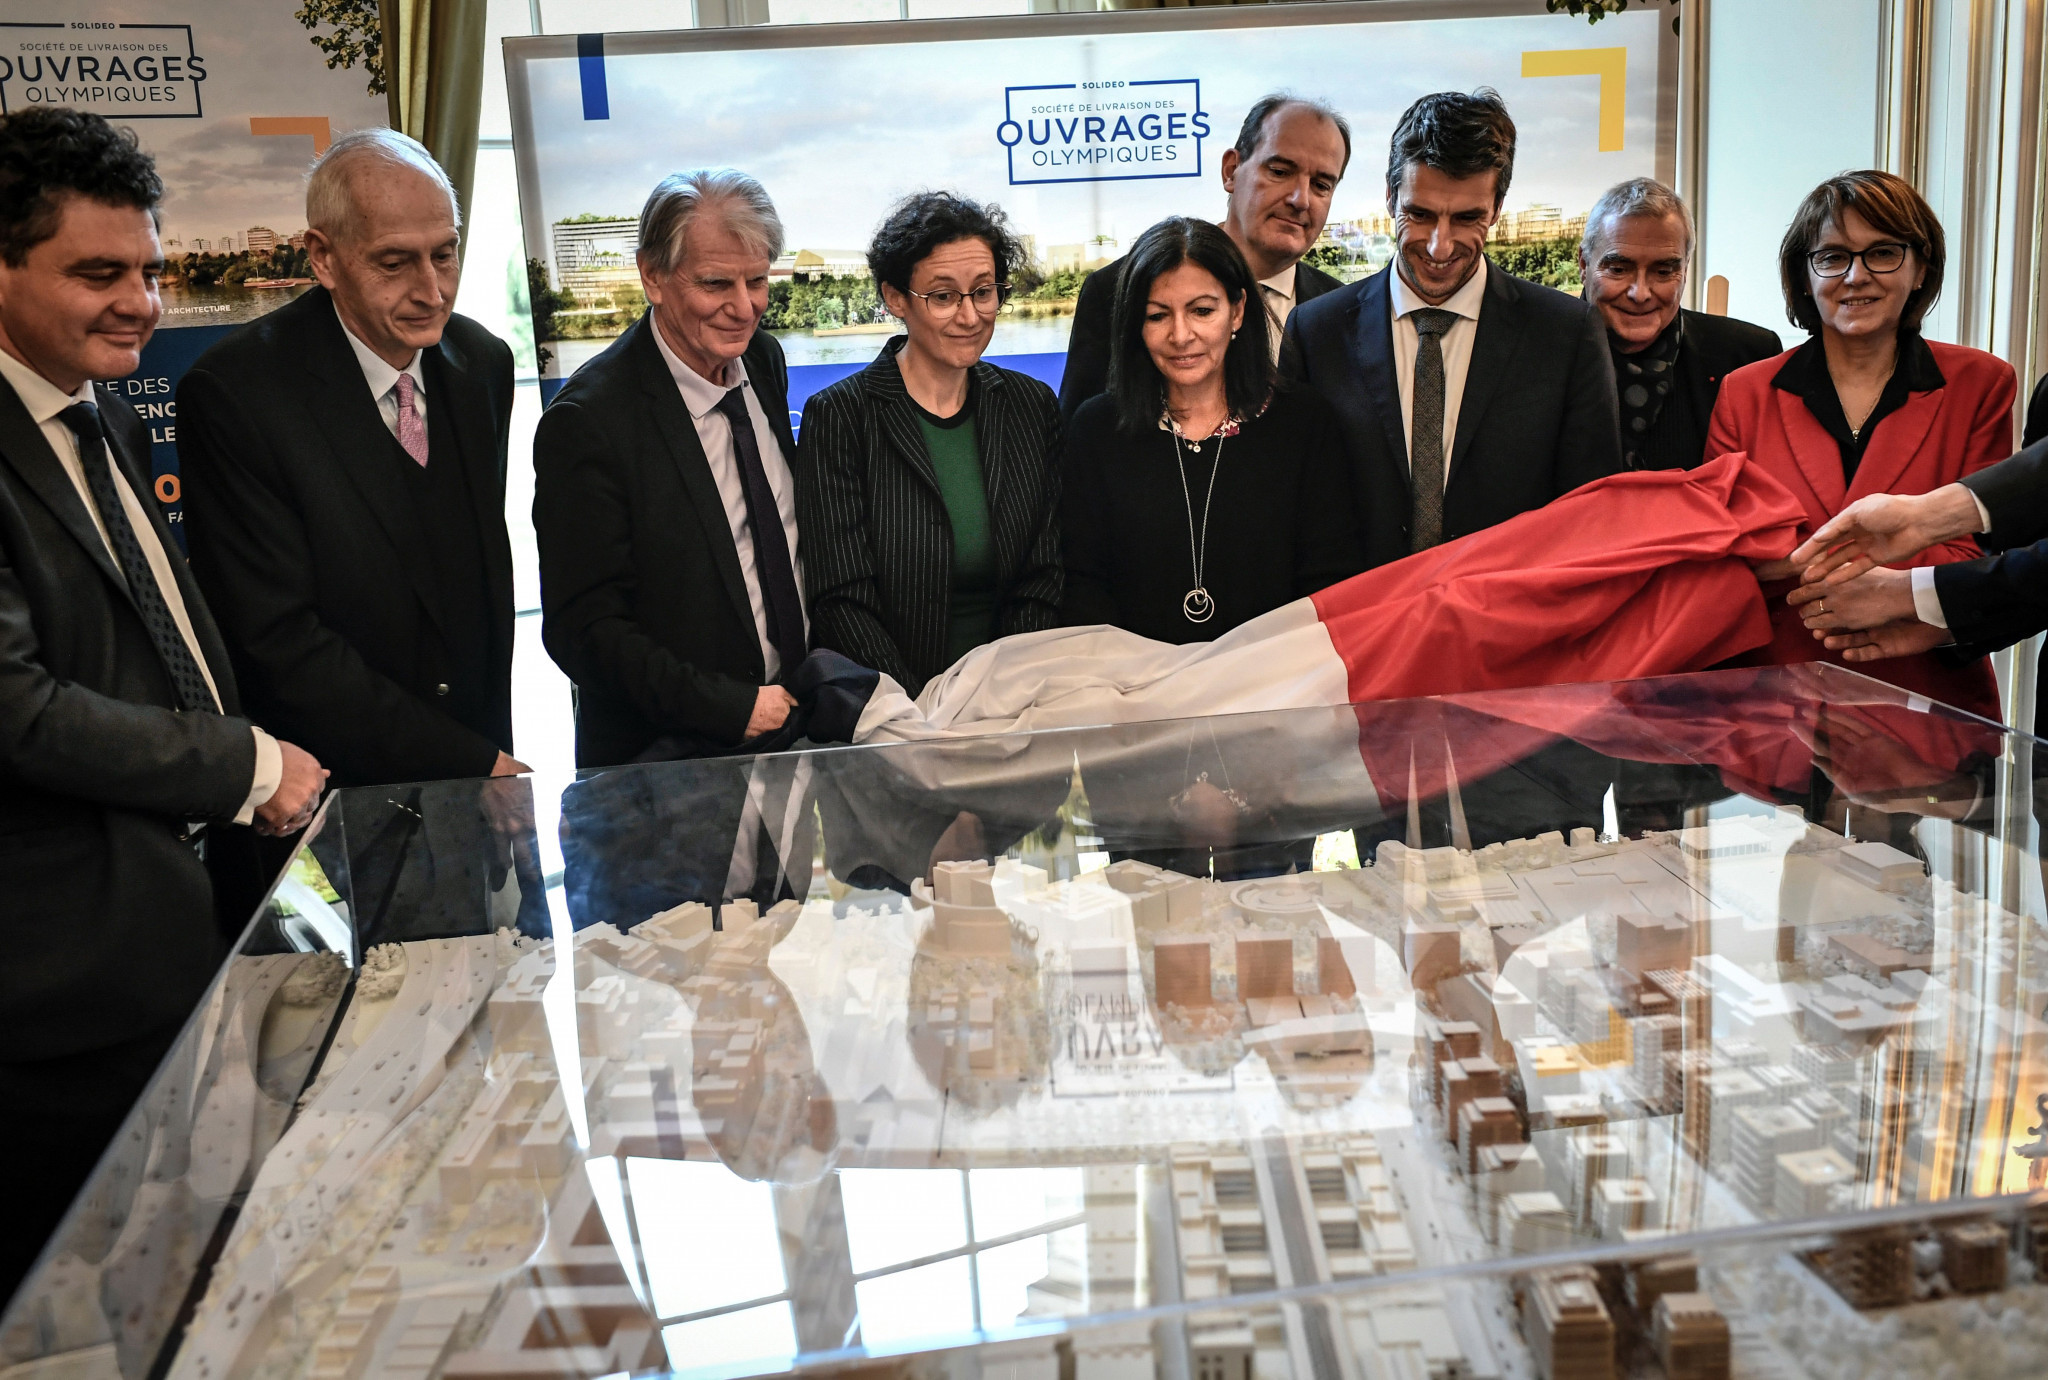 Michel Cadot, second left, looks at a model of the Paris 2024 Olympic Village in a group including Paris Mayor Anne Hidalgo, centre, Jean Castex, fourth from right, and Paris 2024 President Tony Estanguet, third from right ©Getty Images